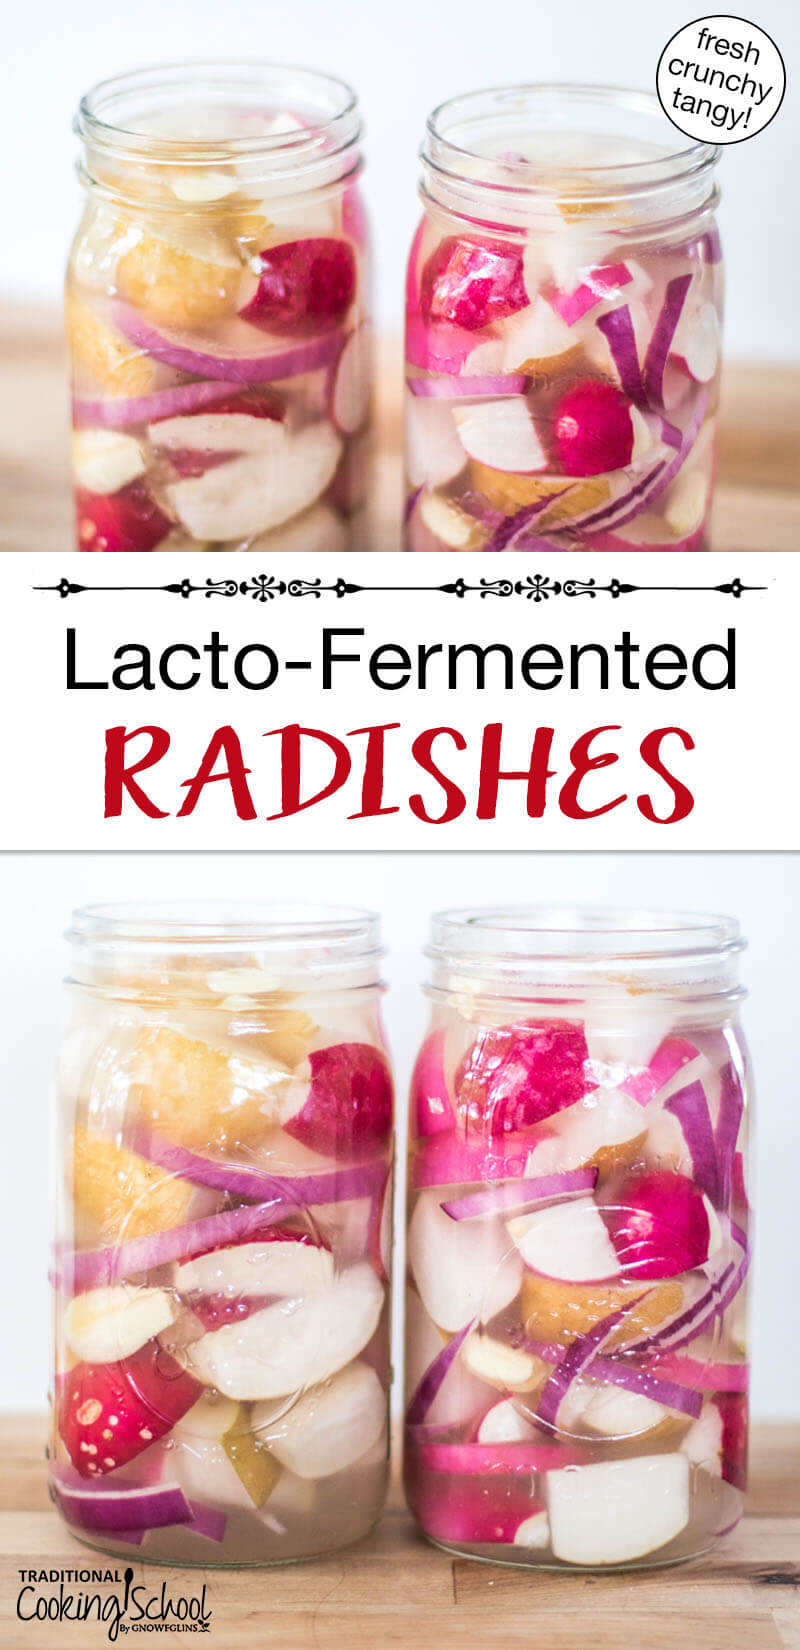 Photo collage of radishes pickling in quart-sized Mason jars. Text overlay says: "Lacto-Fermented Radishes (fresh crunchy tangy!)"